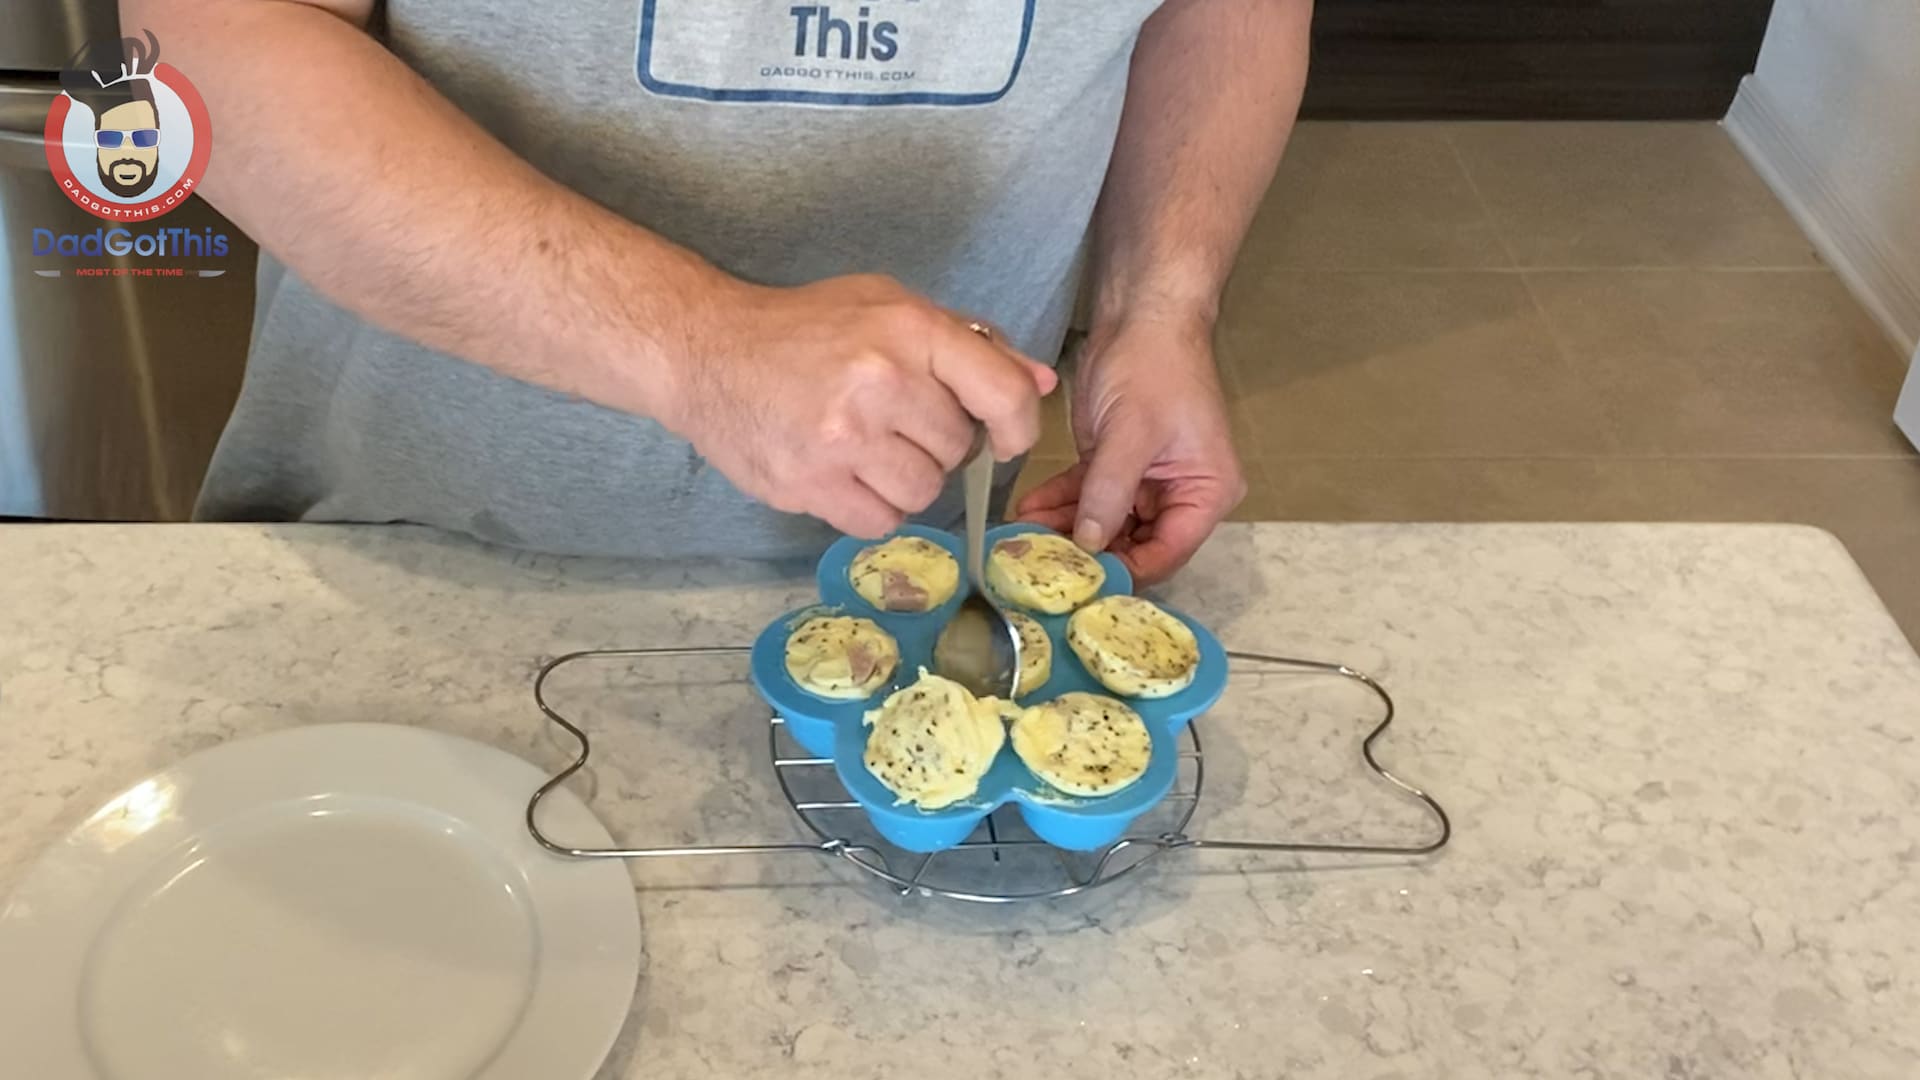 Running a spoon around the egg mold to release the egg bites